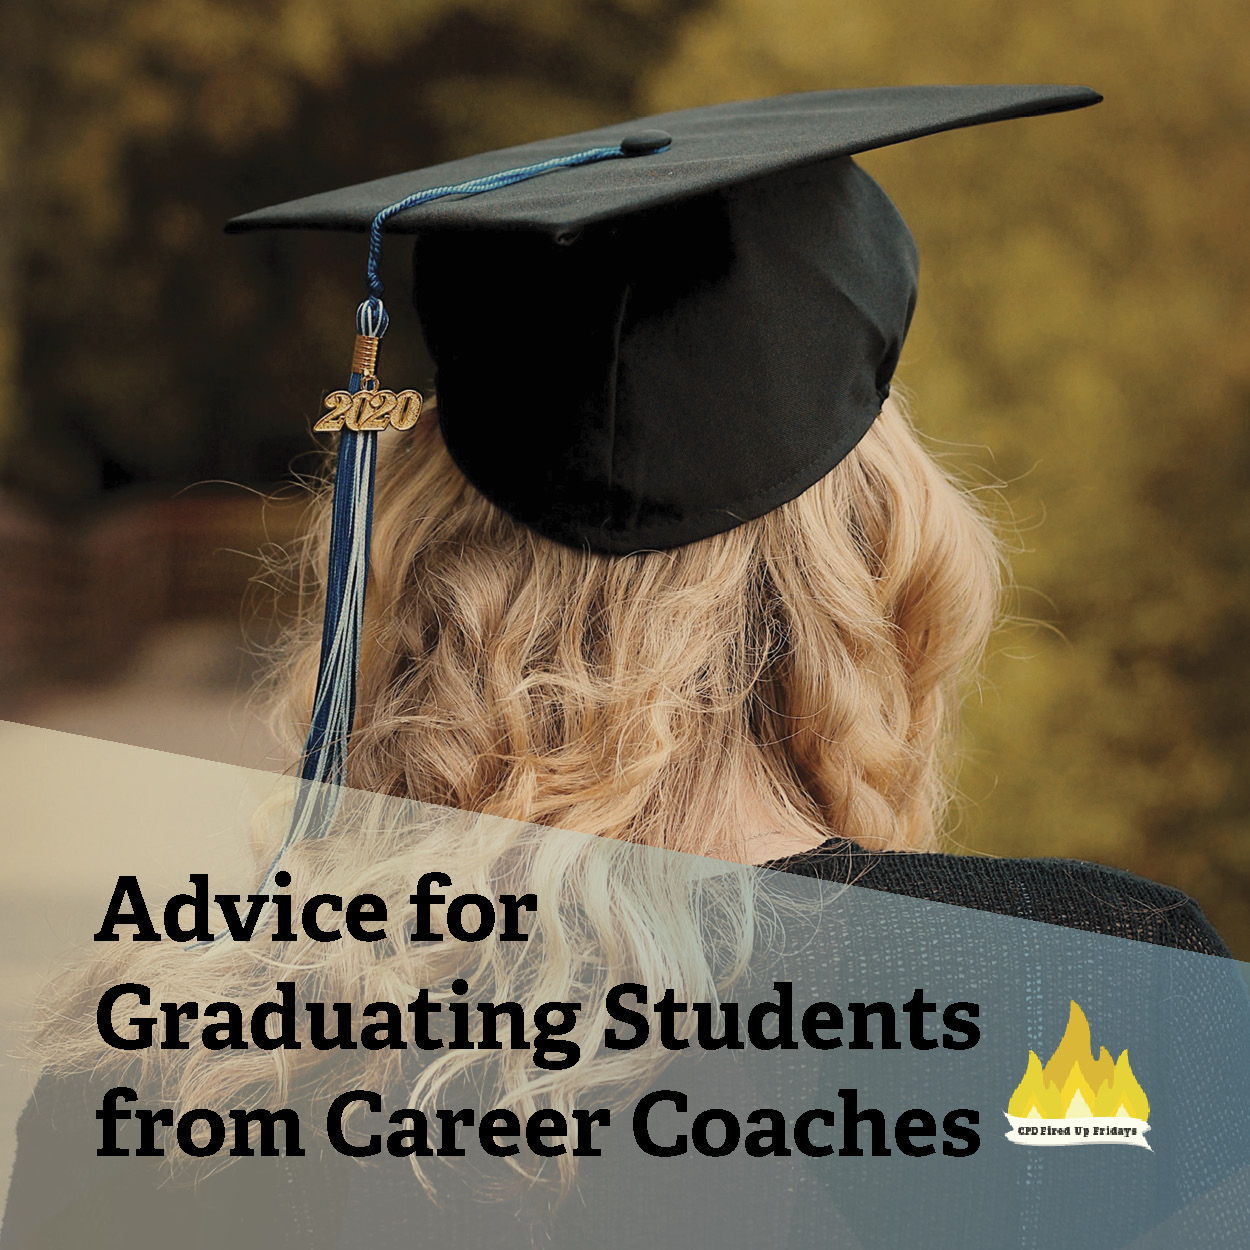 A student with long, curled blonde hair looks ahead, facing away from the camera. The student wears a black graduation cap and gown, with a blue tassel on the cap that has a '2020' gold emblem. Underneath the image, text reads: 'Advice to Graduating Students from Career Coaches.'